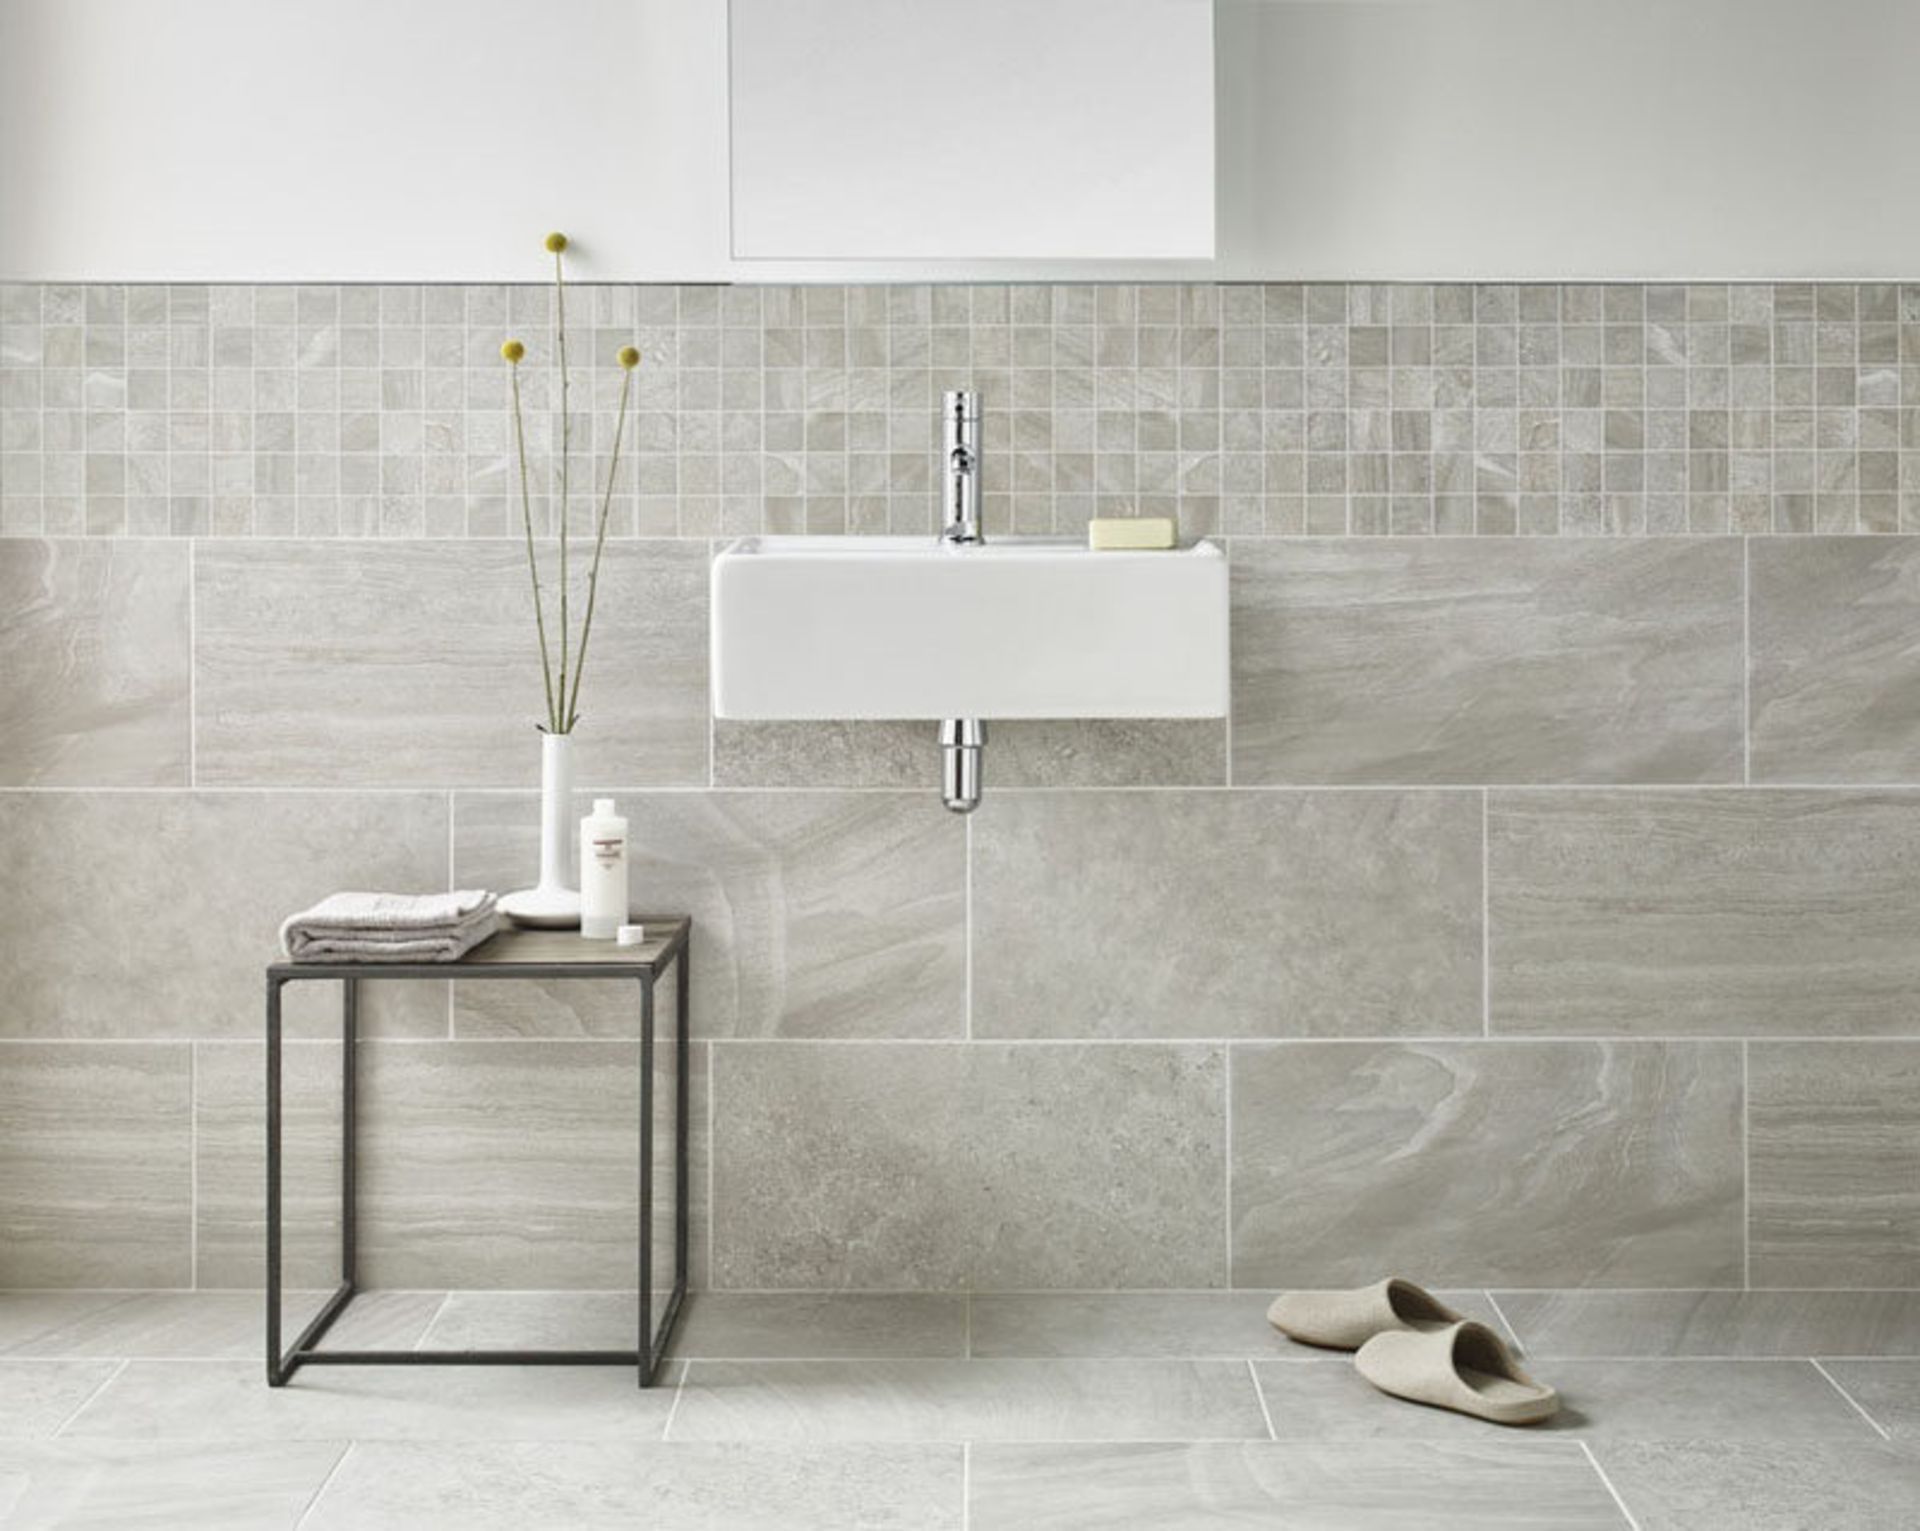 NEW 8.64m2 Bloomsbury Brook Edge Lapatto Beige Wall and Floor Tiles. 300x600mm per tile, 8.3mm... - Image 3 of 3